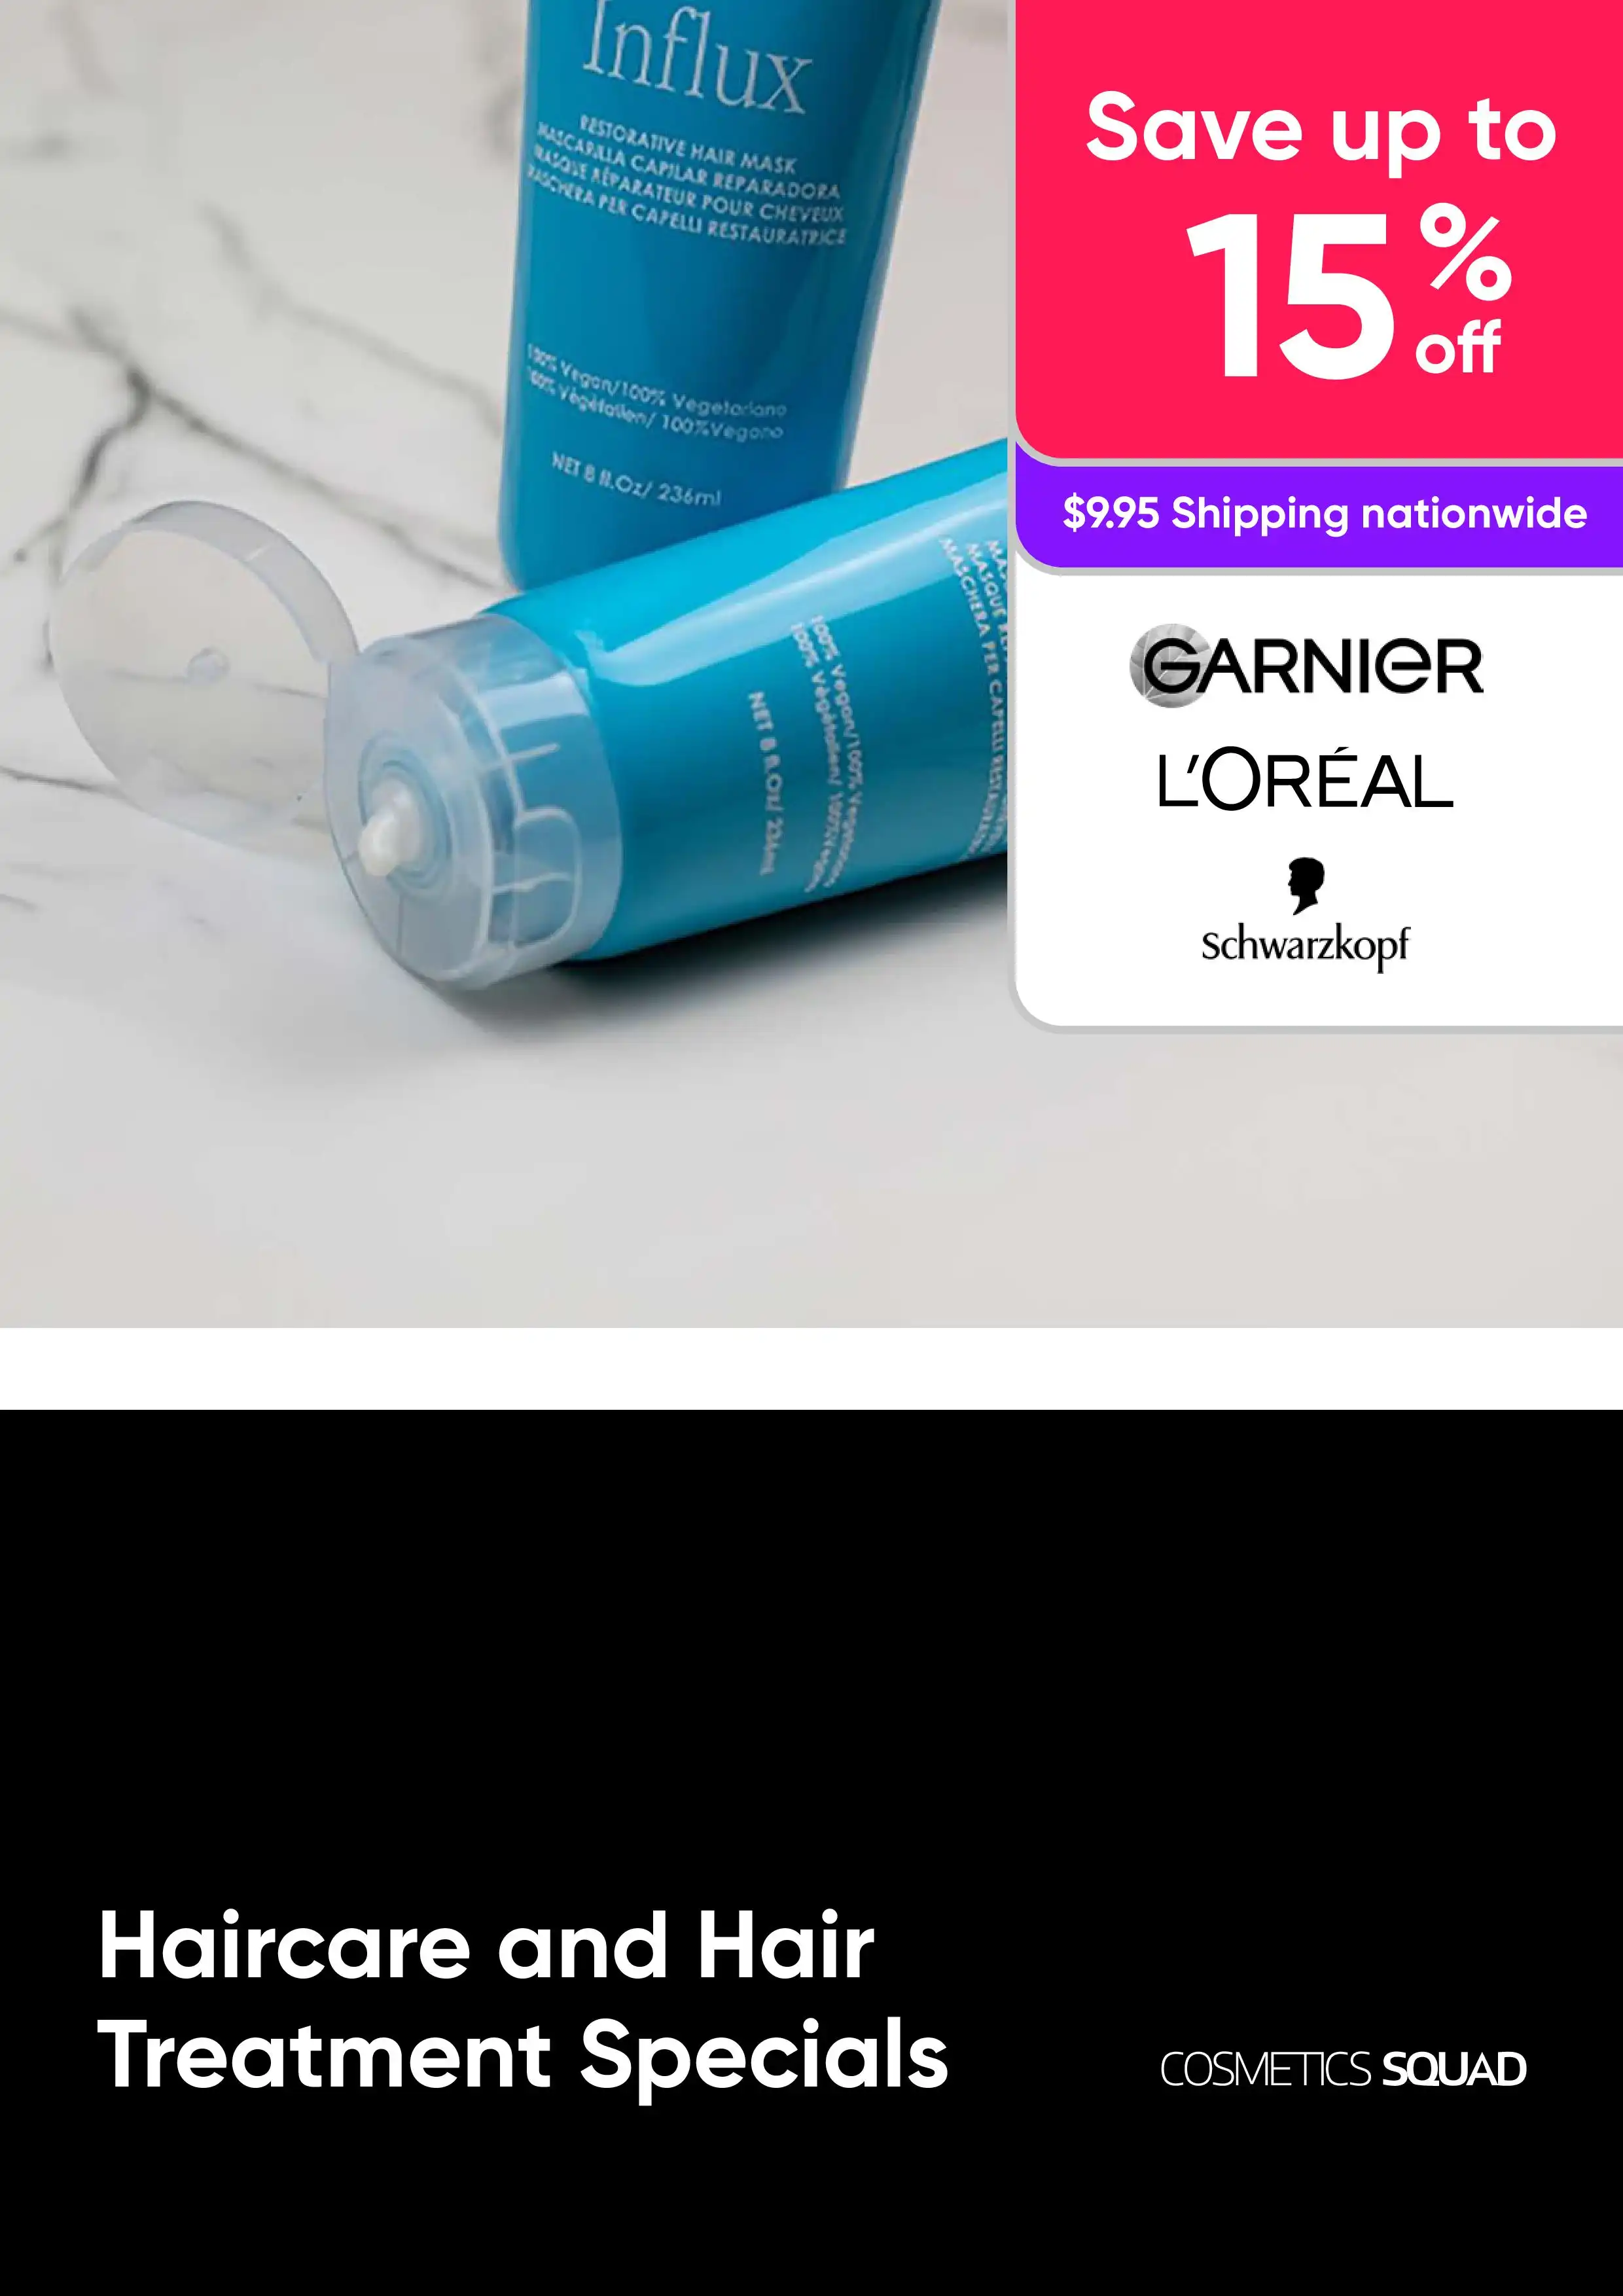 Haircare and Hair Treatment Sale - Garnier, L'Oreal, Schwarzkopf - Deals from $10